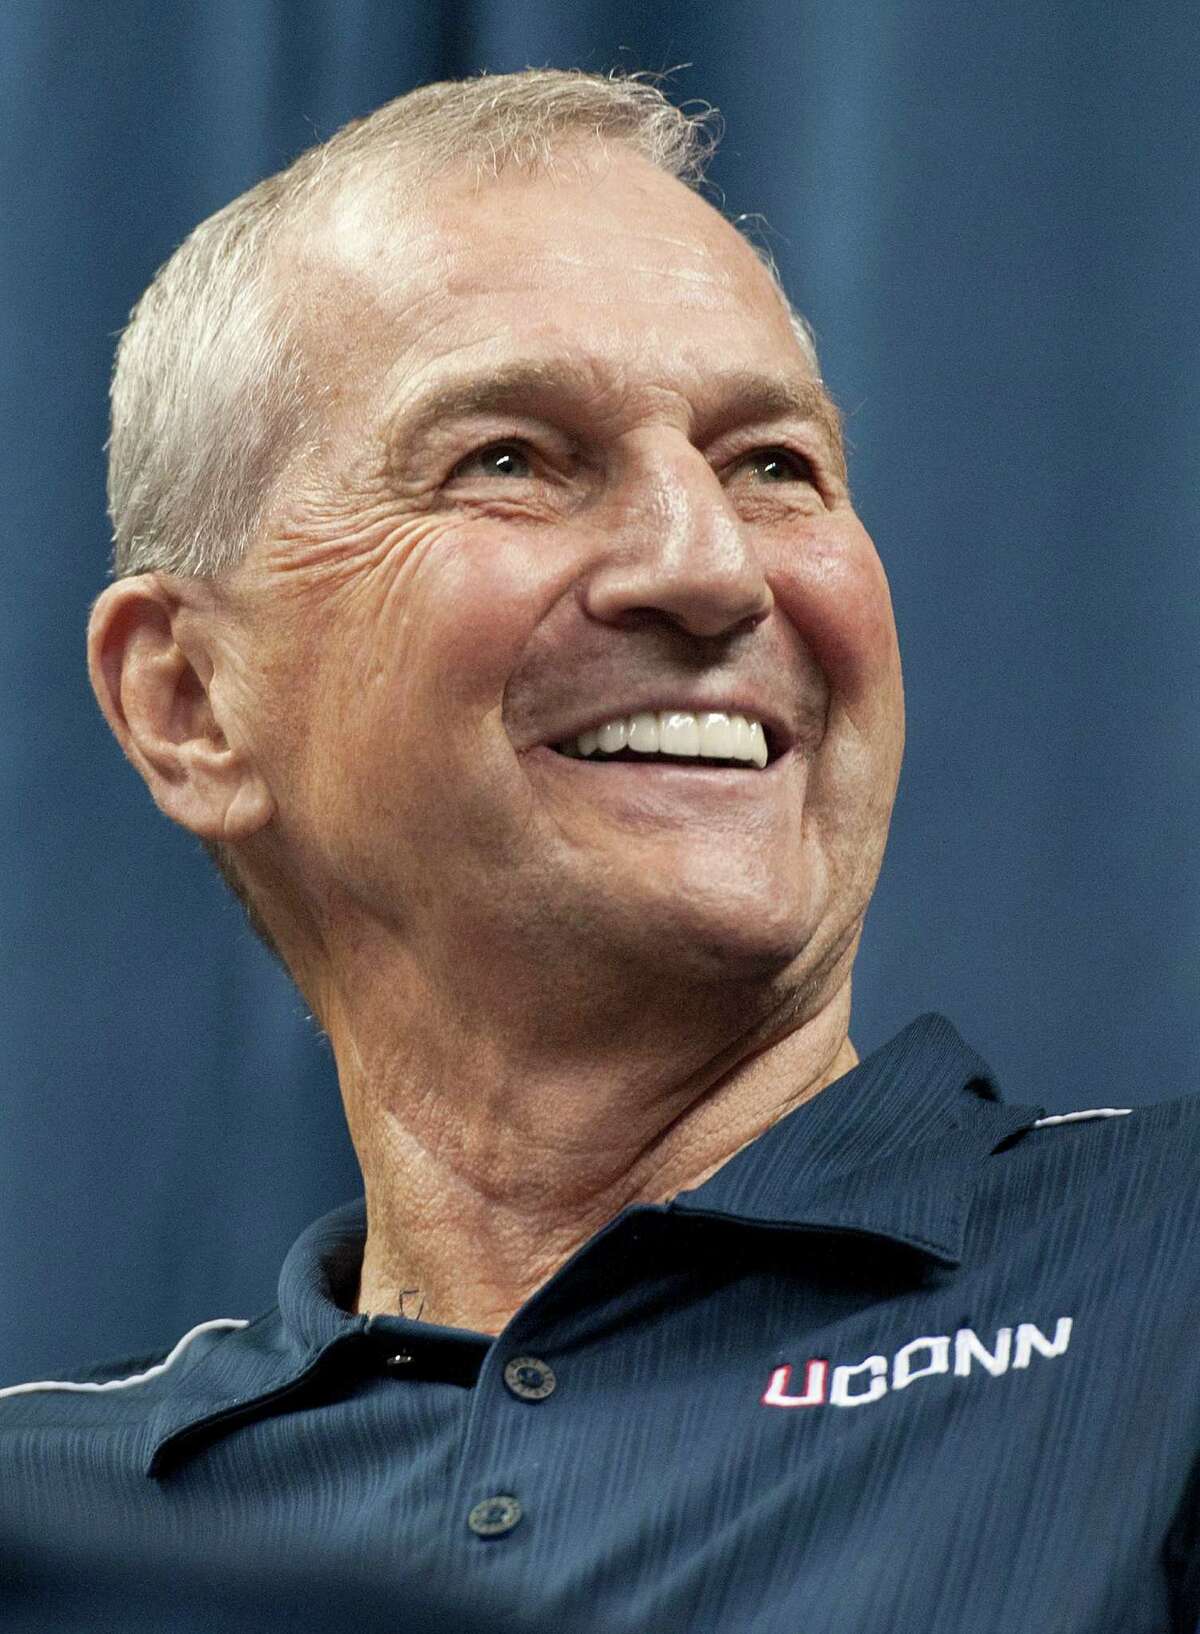 Connecticut head coach Jim Calhoun smiles during a news conference to announce his retirement in Storrs, Conn., Thursday, Sept. 13, 2012. The 70-year-old Hall of Famer ran the men's program for 26 years and won three national titles. Assistant coach Kevin Ollie, who played for Calhoun and was his hand-picked successor, will be introduced as the Huskies' new coach. The person familiar with the deal said Ollie will receive a one-year contract. (AP Photo/Jessica Hill)